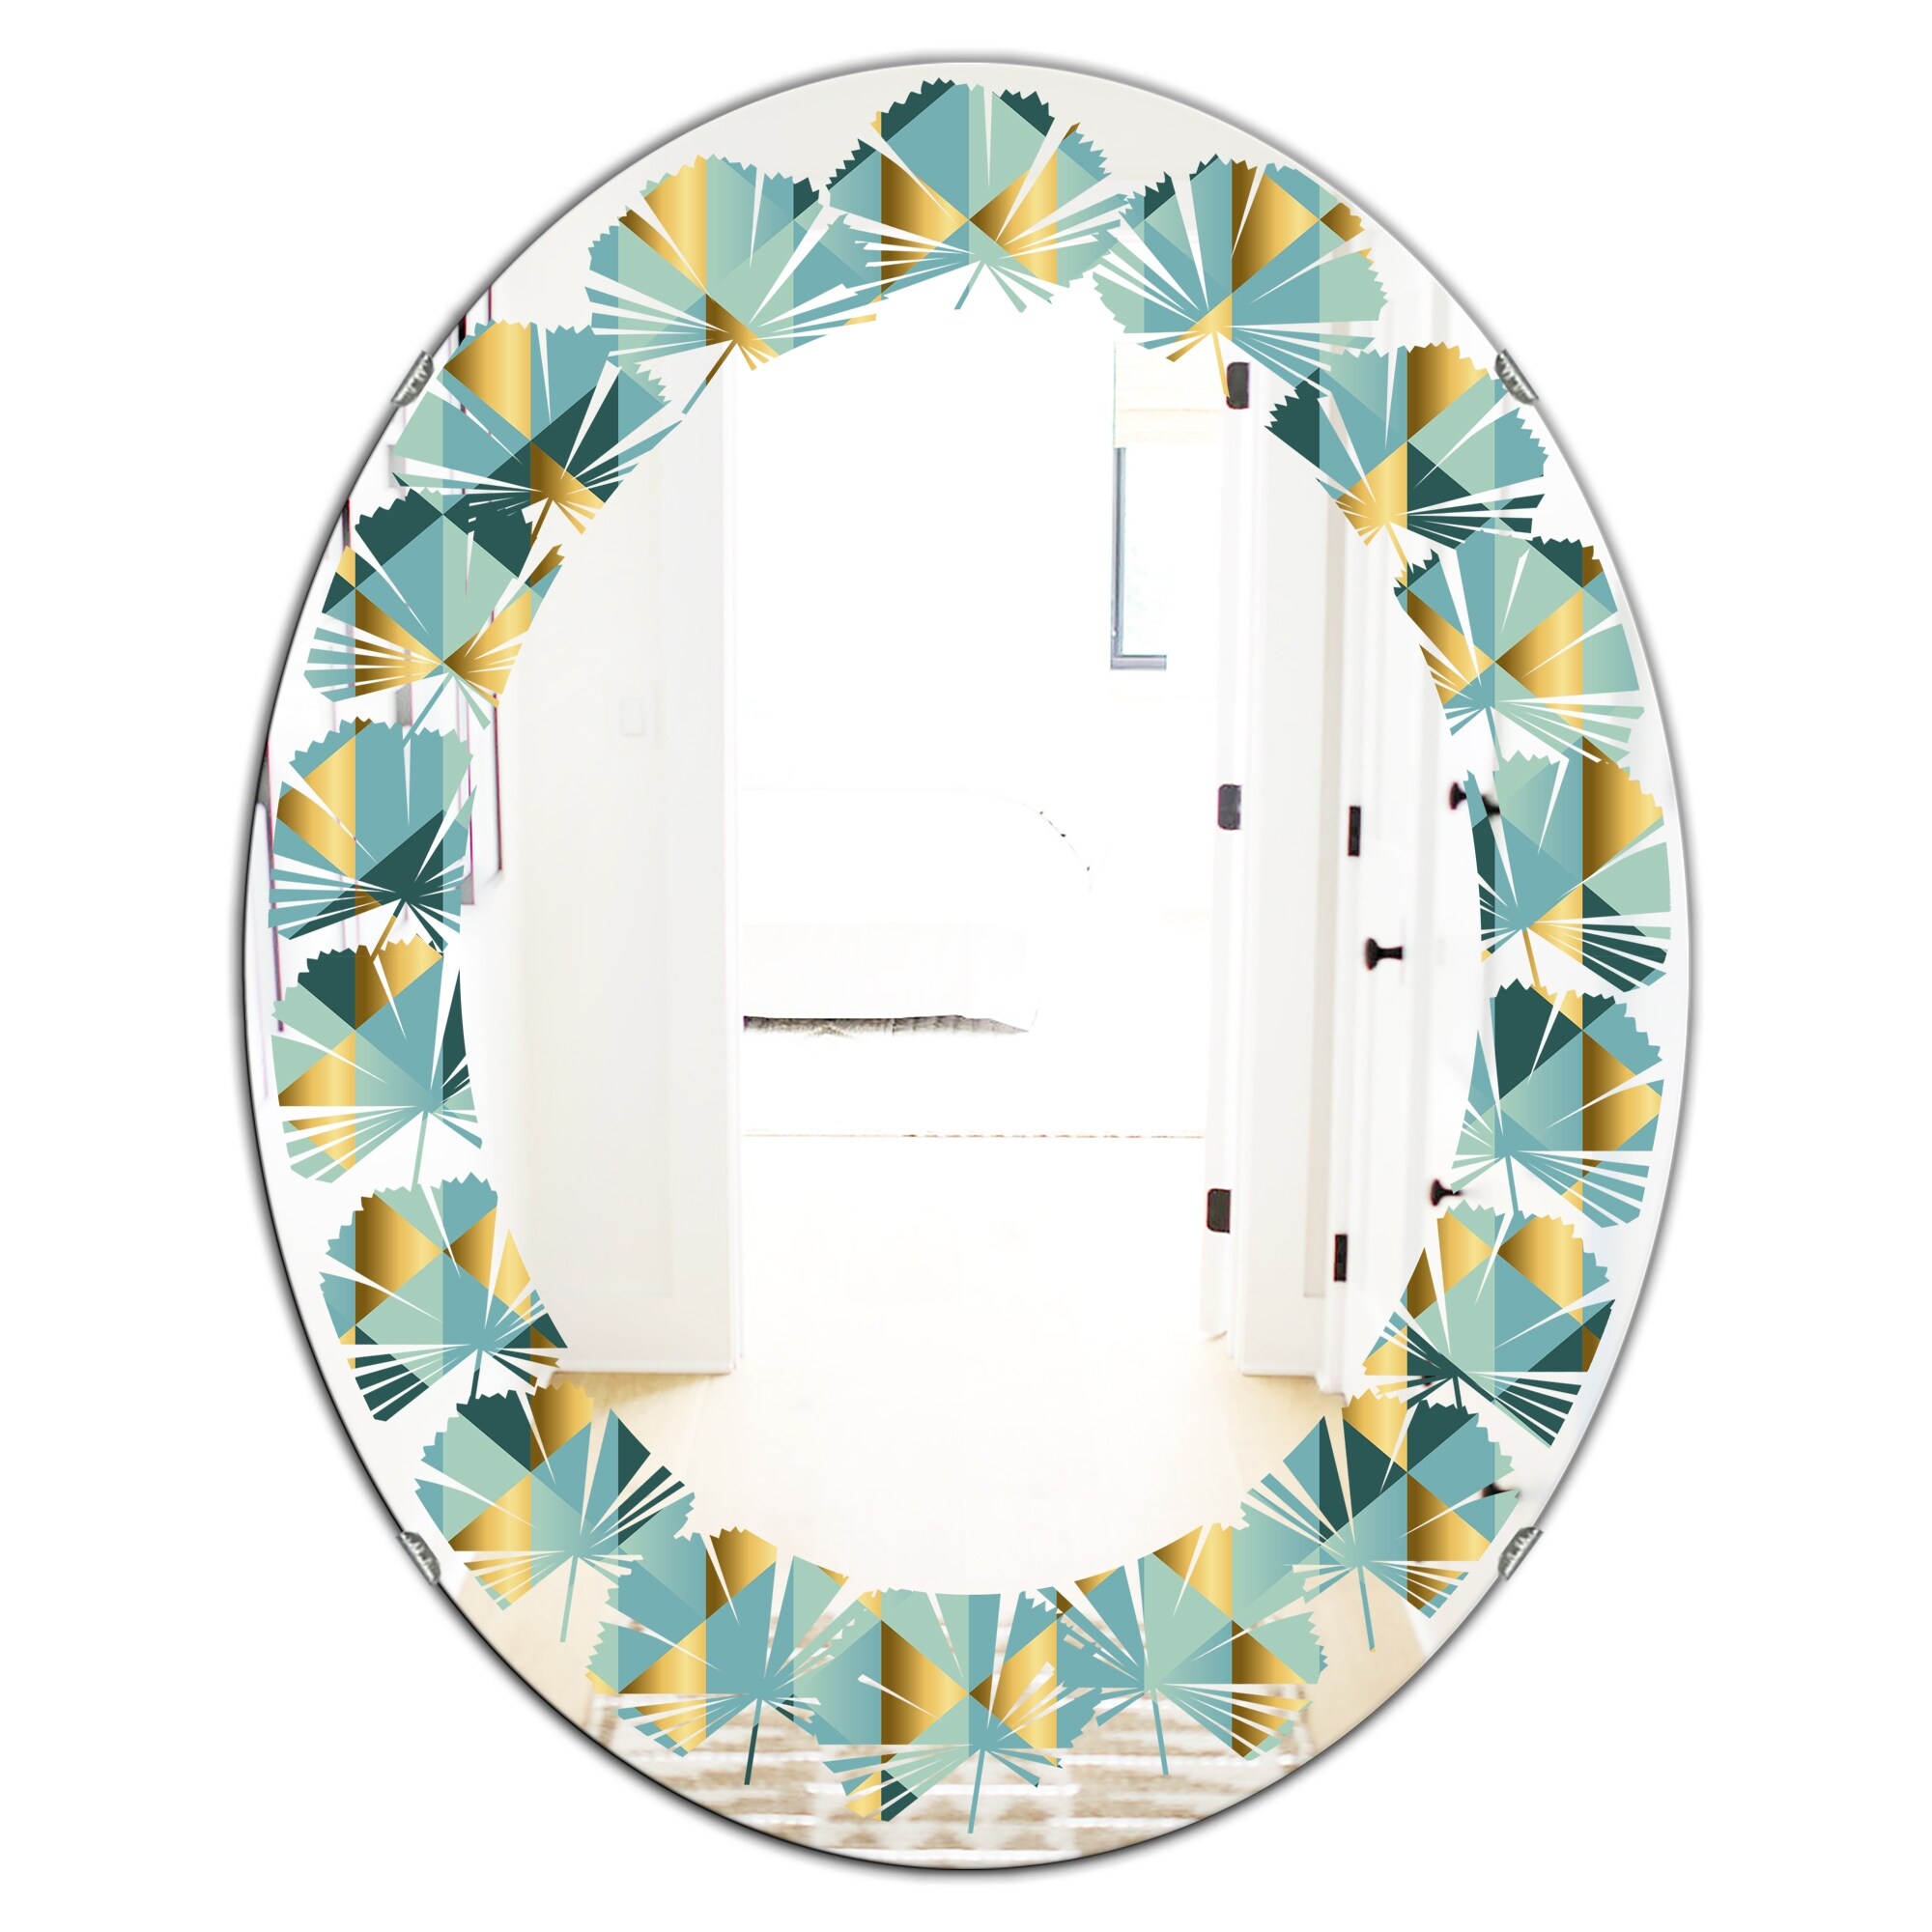 Designart 'Gold and Blue Dynamics V' Printed Modern Round or Oval Wall Mirror - Leaves